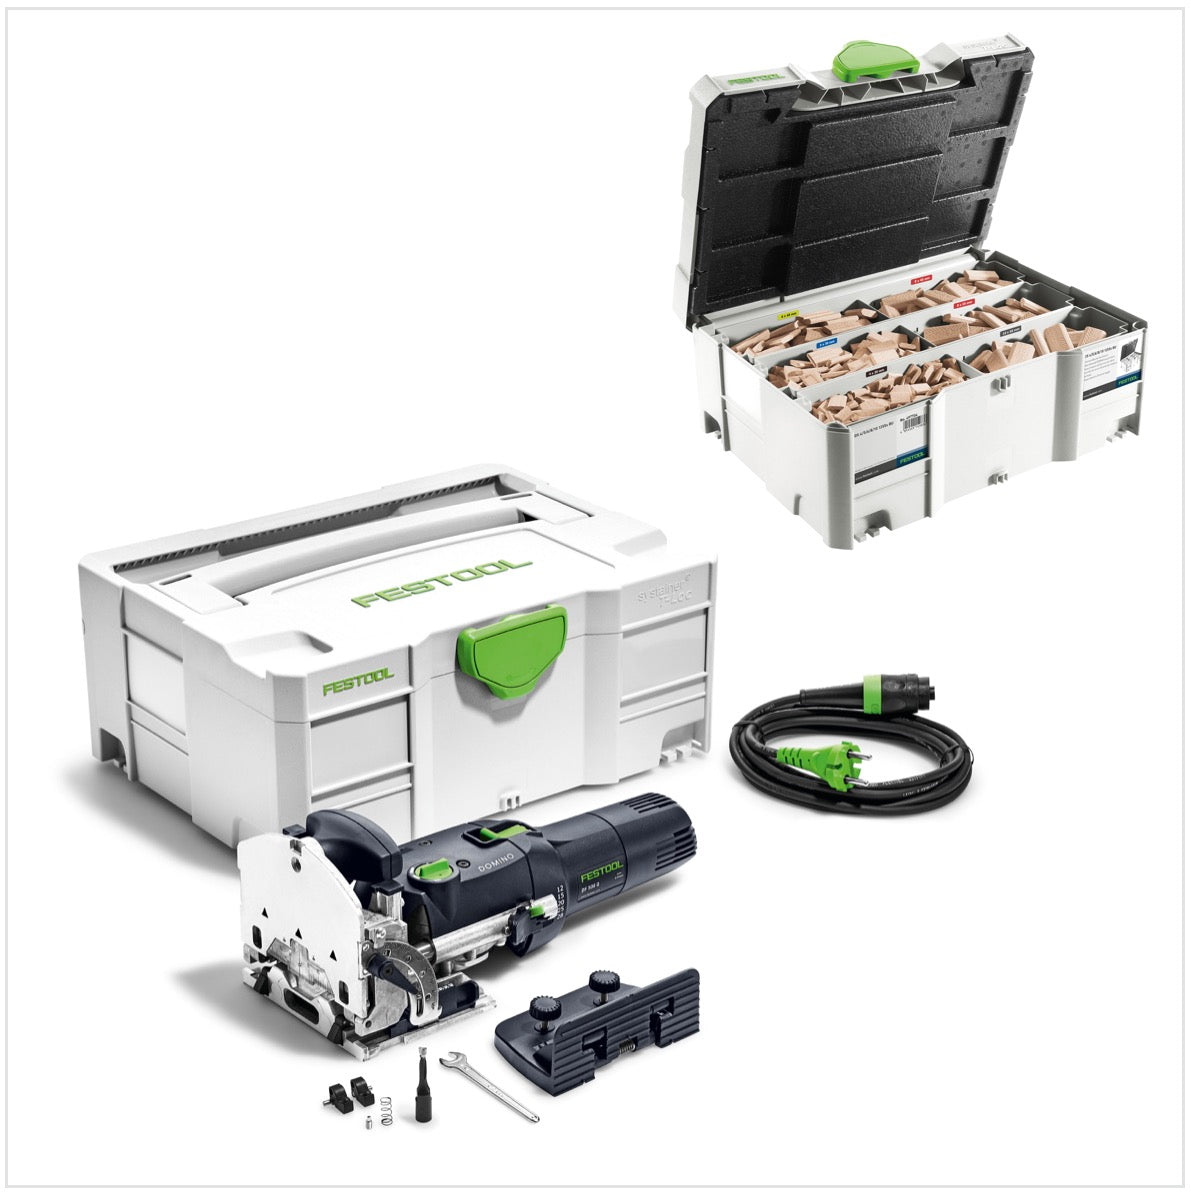 Festool DF 500 Q-Plus Dübelfräse Domino 420W 28mm im Systainer ( 494847 ) + Domino-Sortiment ( 498899 ) - Toolbrothers